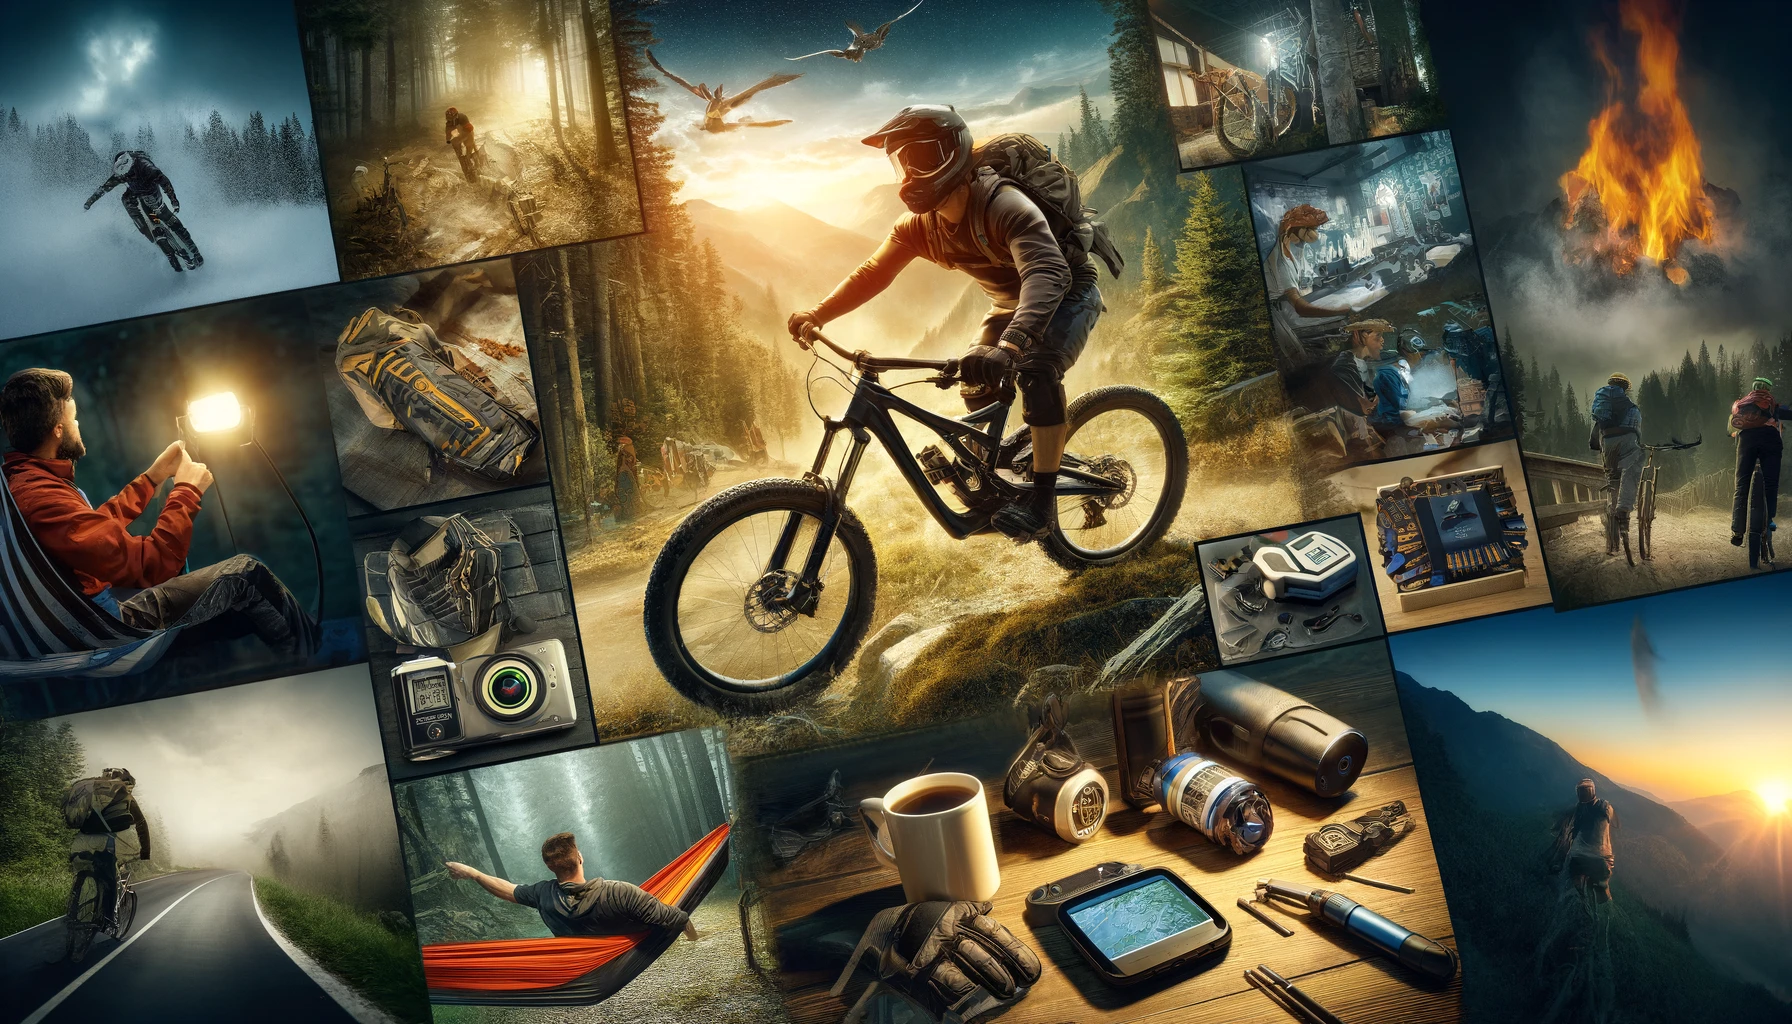 Montage of mountain biking scenes including a biker in high-performance gear on a rugged trail, using safety equipment, fixing a bike with maintenance tools, and relaxing in a hammock, with close-ups of GPS gadgets, hydration packs, and novelty items.